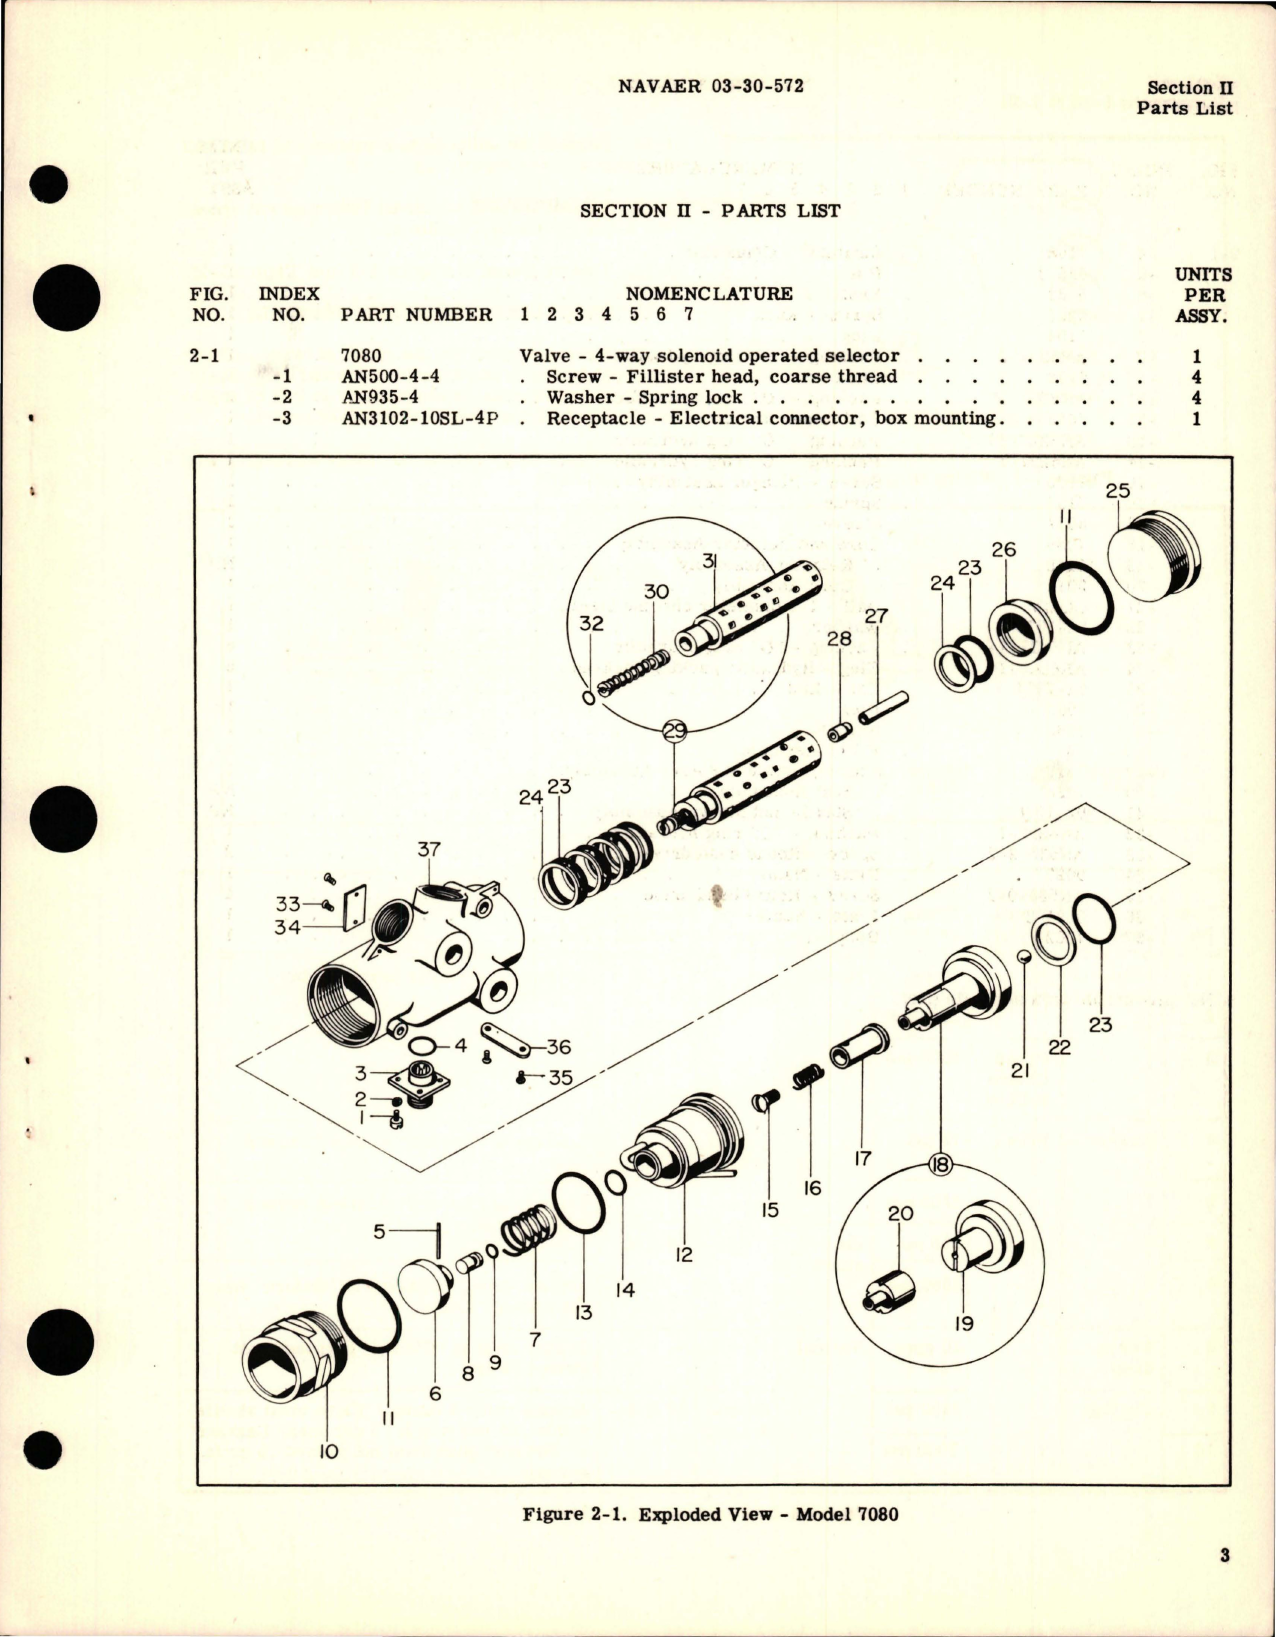 Sample page 5 from AirCorps Library document: Overhaul Instructions with Parts Catalog for Solenoid Operated 4-Way Selector Valve - Model 7080